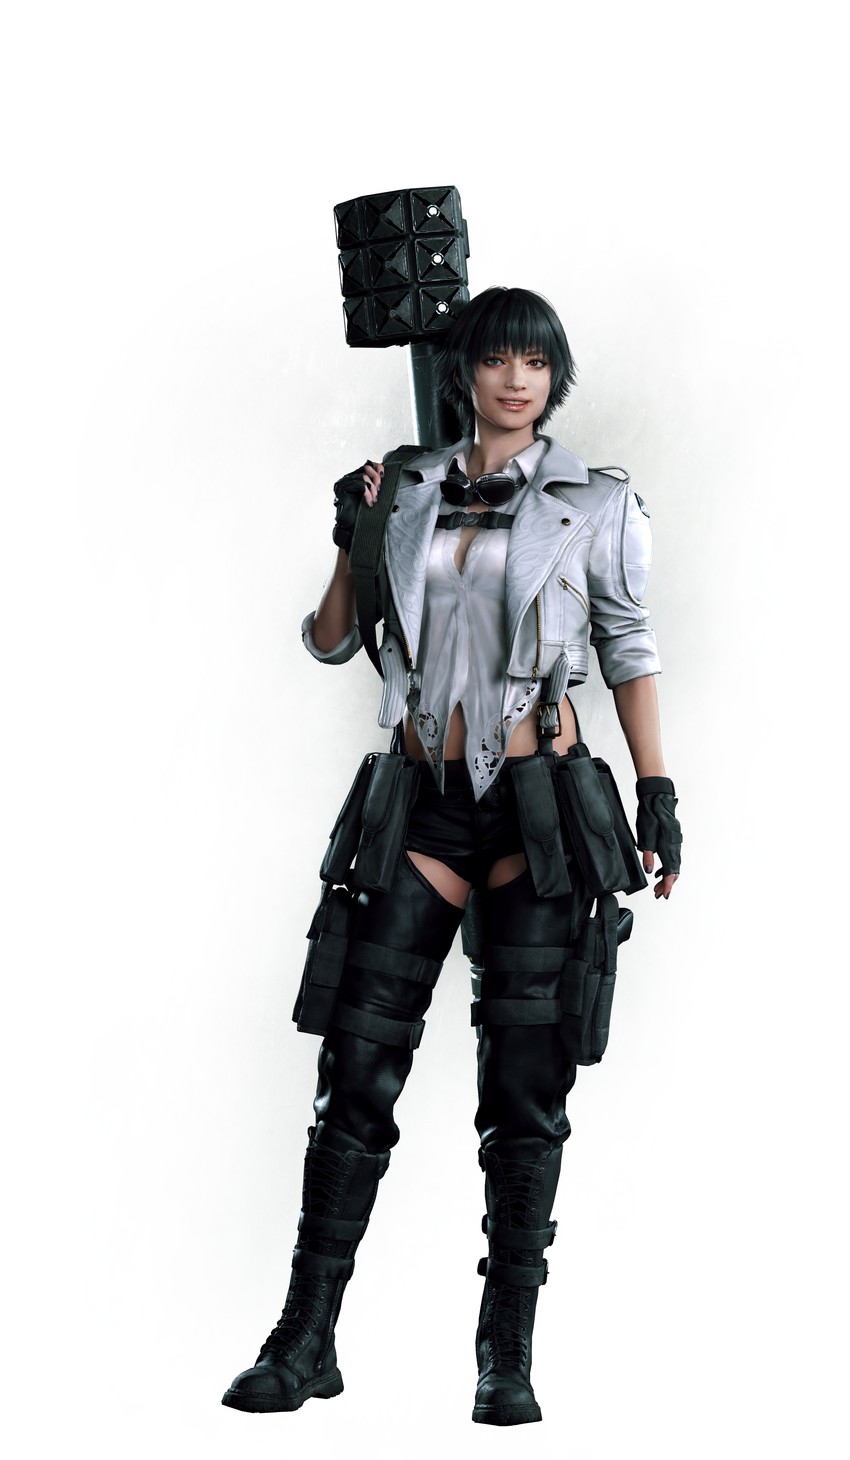 Lady Devil May Cry Devil May Cry 5 Rocket Launchers Video Games Video Game Characters Simple Backgro 850x1460